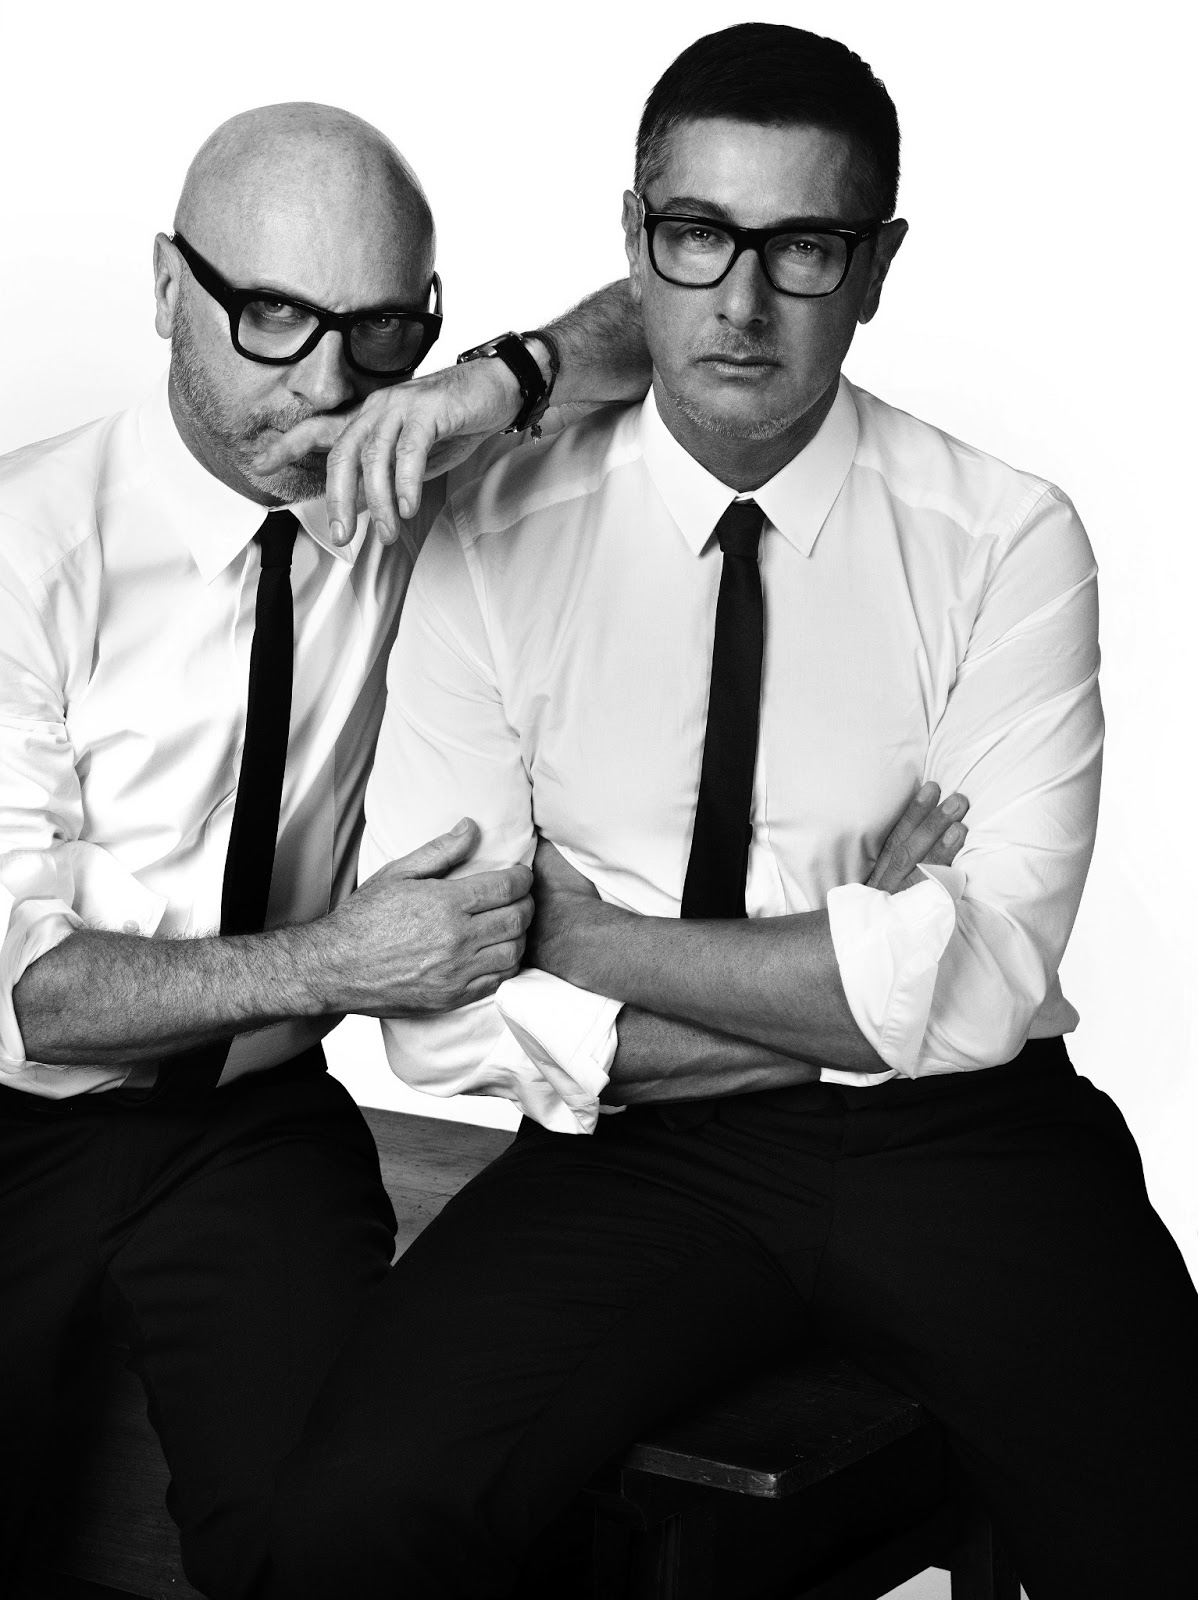 Mens Styling Domenico Dolce And Stefano Gabbana In London With British Gq